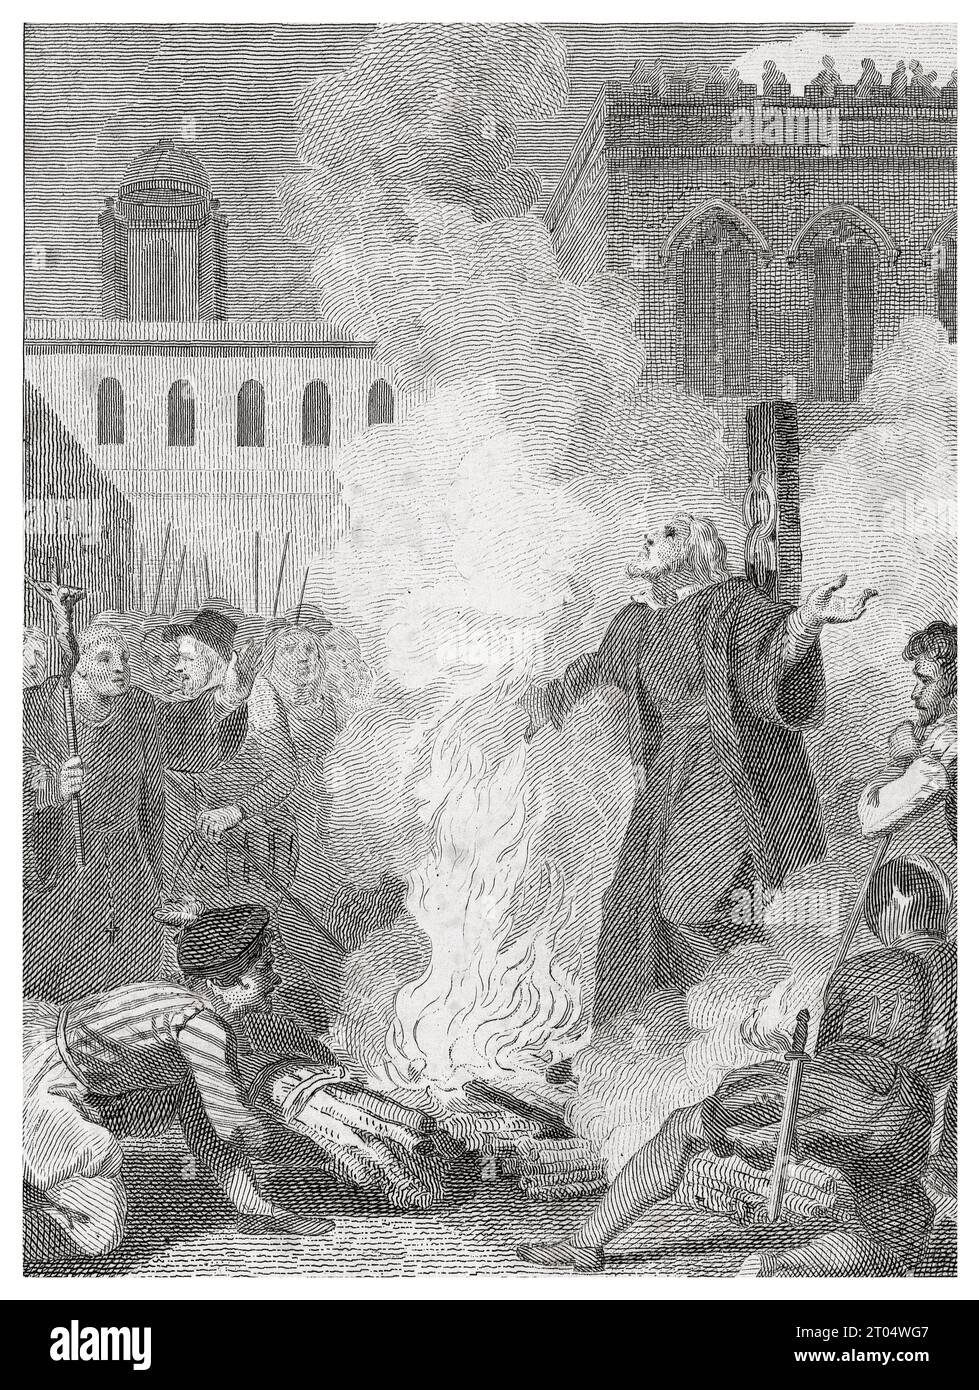 The burning of Thomas Cranmer (1489-1556), Archbishop of Canterbury, engraving in etching by Anker Smith after Robert Smirke, 1811 Stock Photo